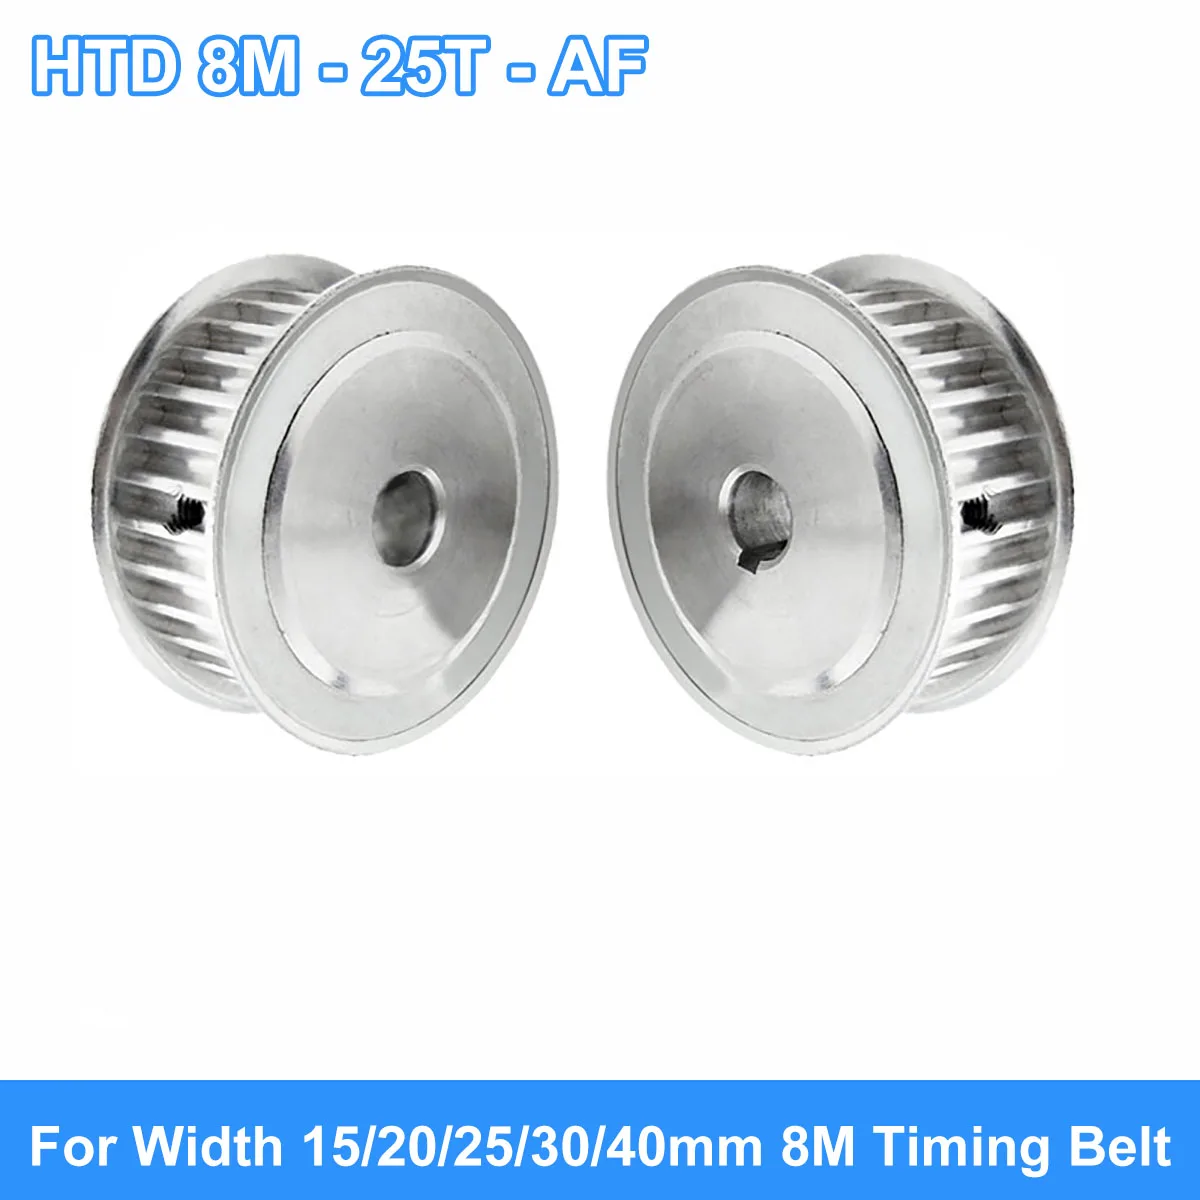 

HTD 8M 25Tooth Timing Pulley 8M-25T AF Synchronus Pulley Keyway Bore 8-28mm For Width 15/20/25/30/40mm 8M Timing Belt